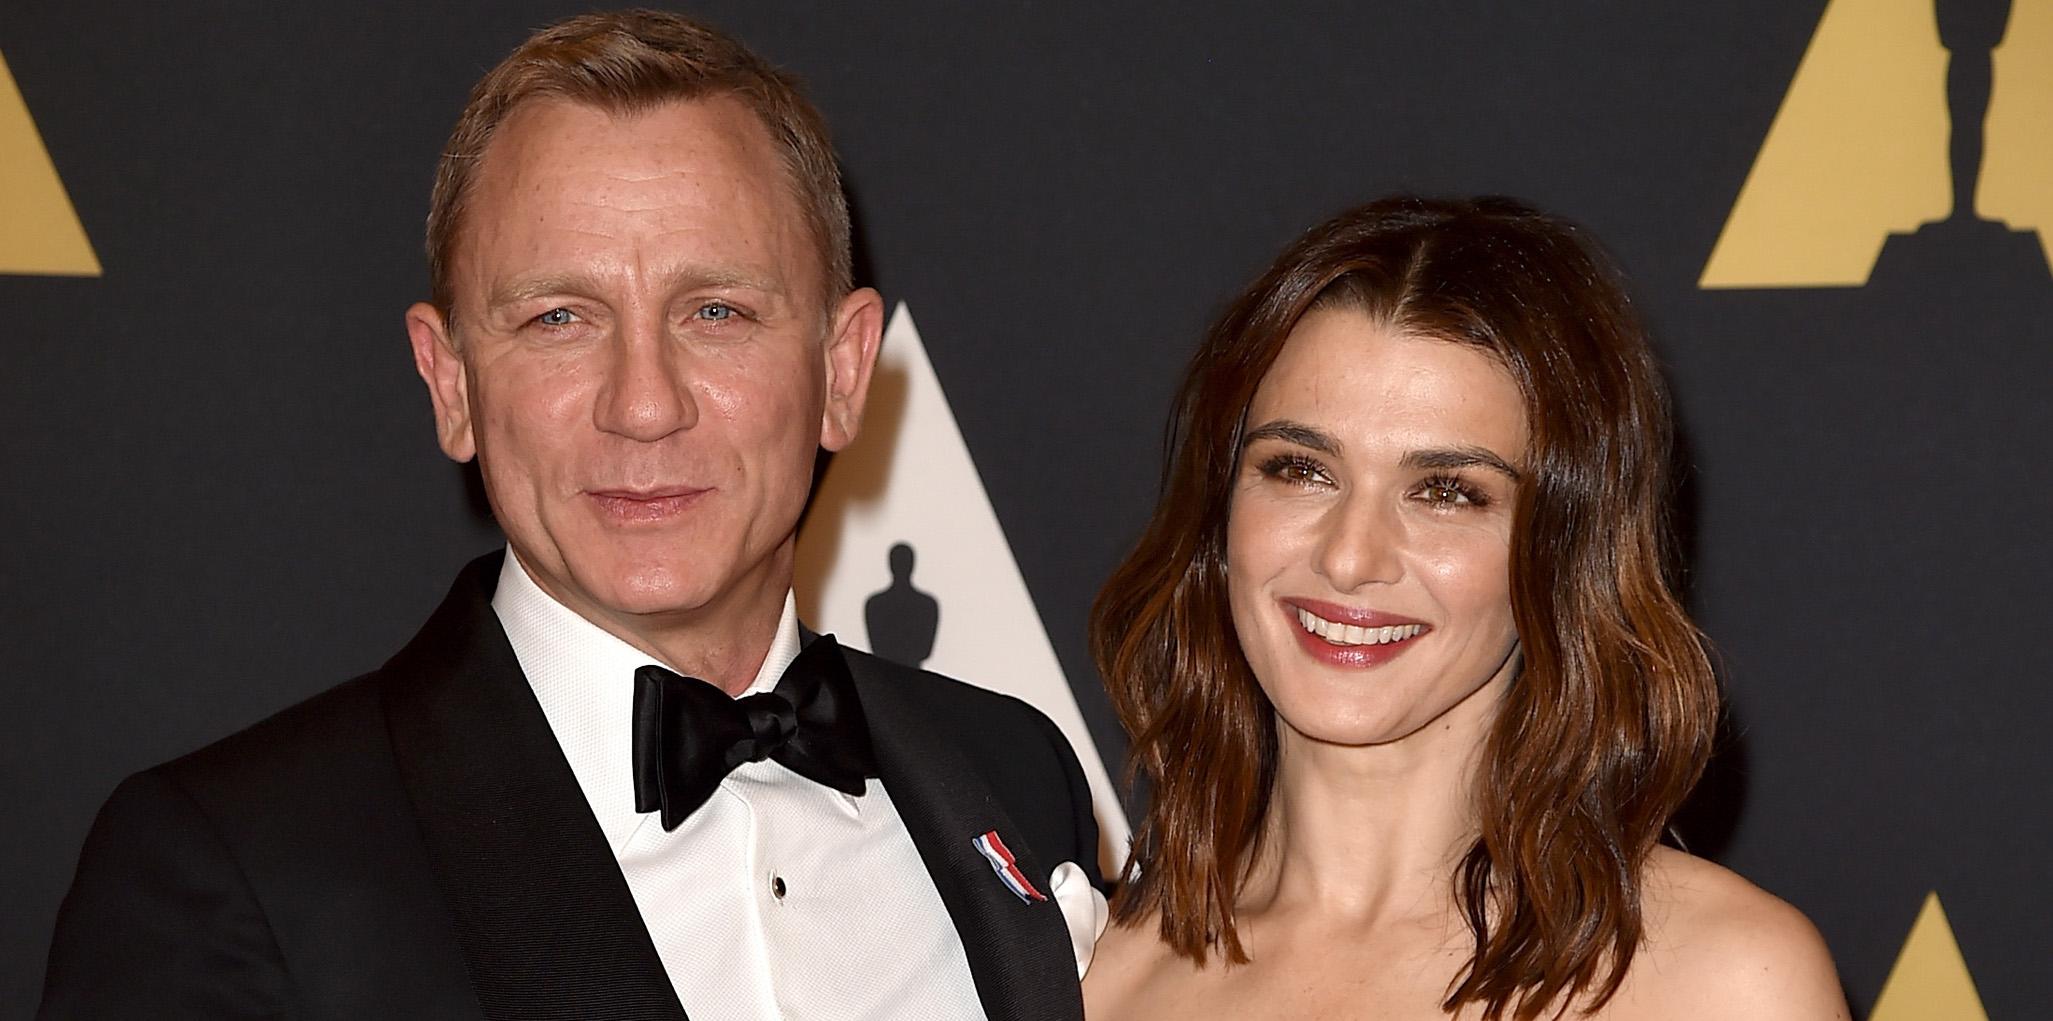 Is Daniel Craig Married? His Wife Is a Fellow Actor. Here's What We Know